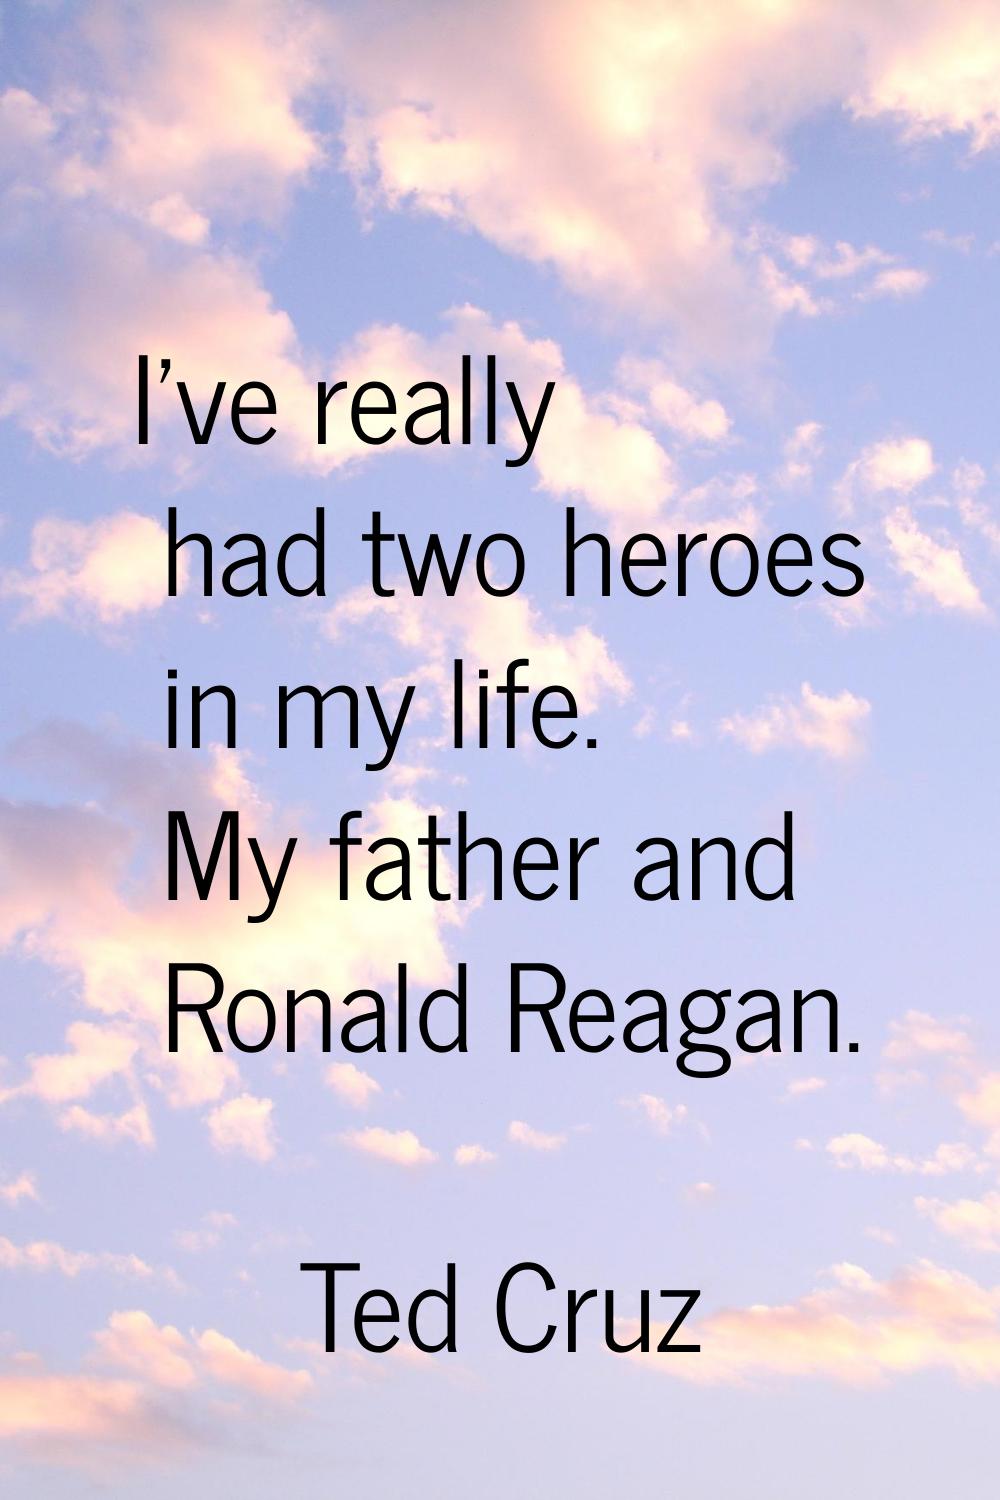 I've really had two heroes in my life. My father and Ronald Reagan.